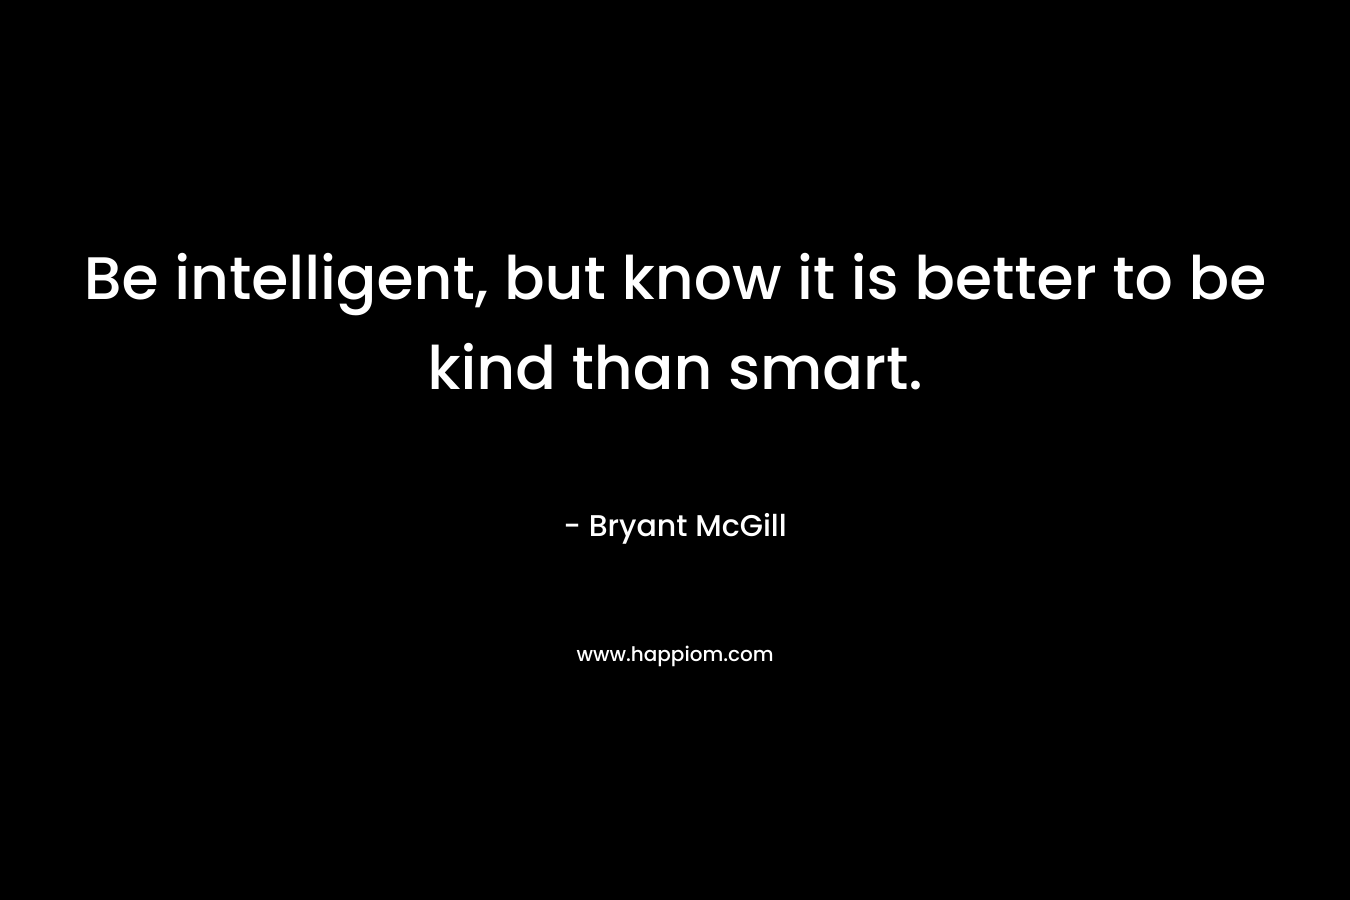 Be intelligent, but know it is better to be kind than smart.